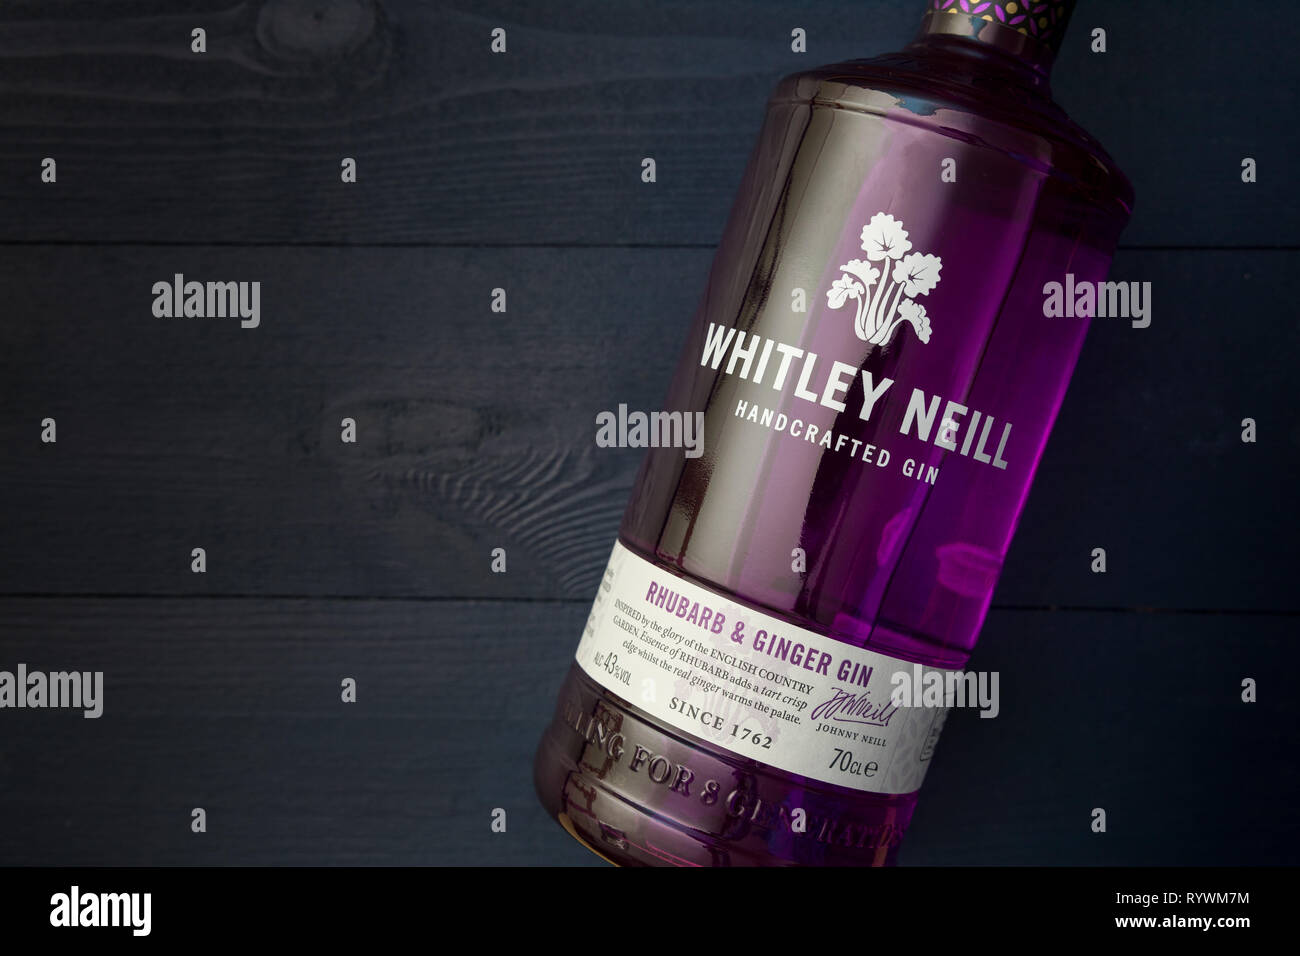 LONDON - MARCH 13, 2019: Whitley Neill Rhubarb Ginger Gin in purple glass bottle on dark wood background Stock Photo